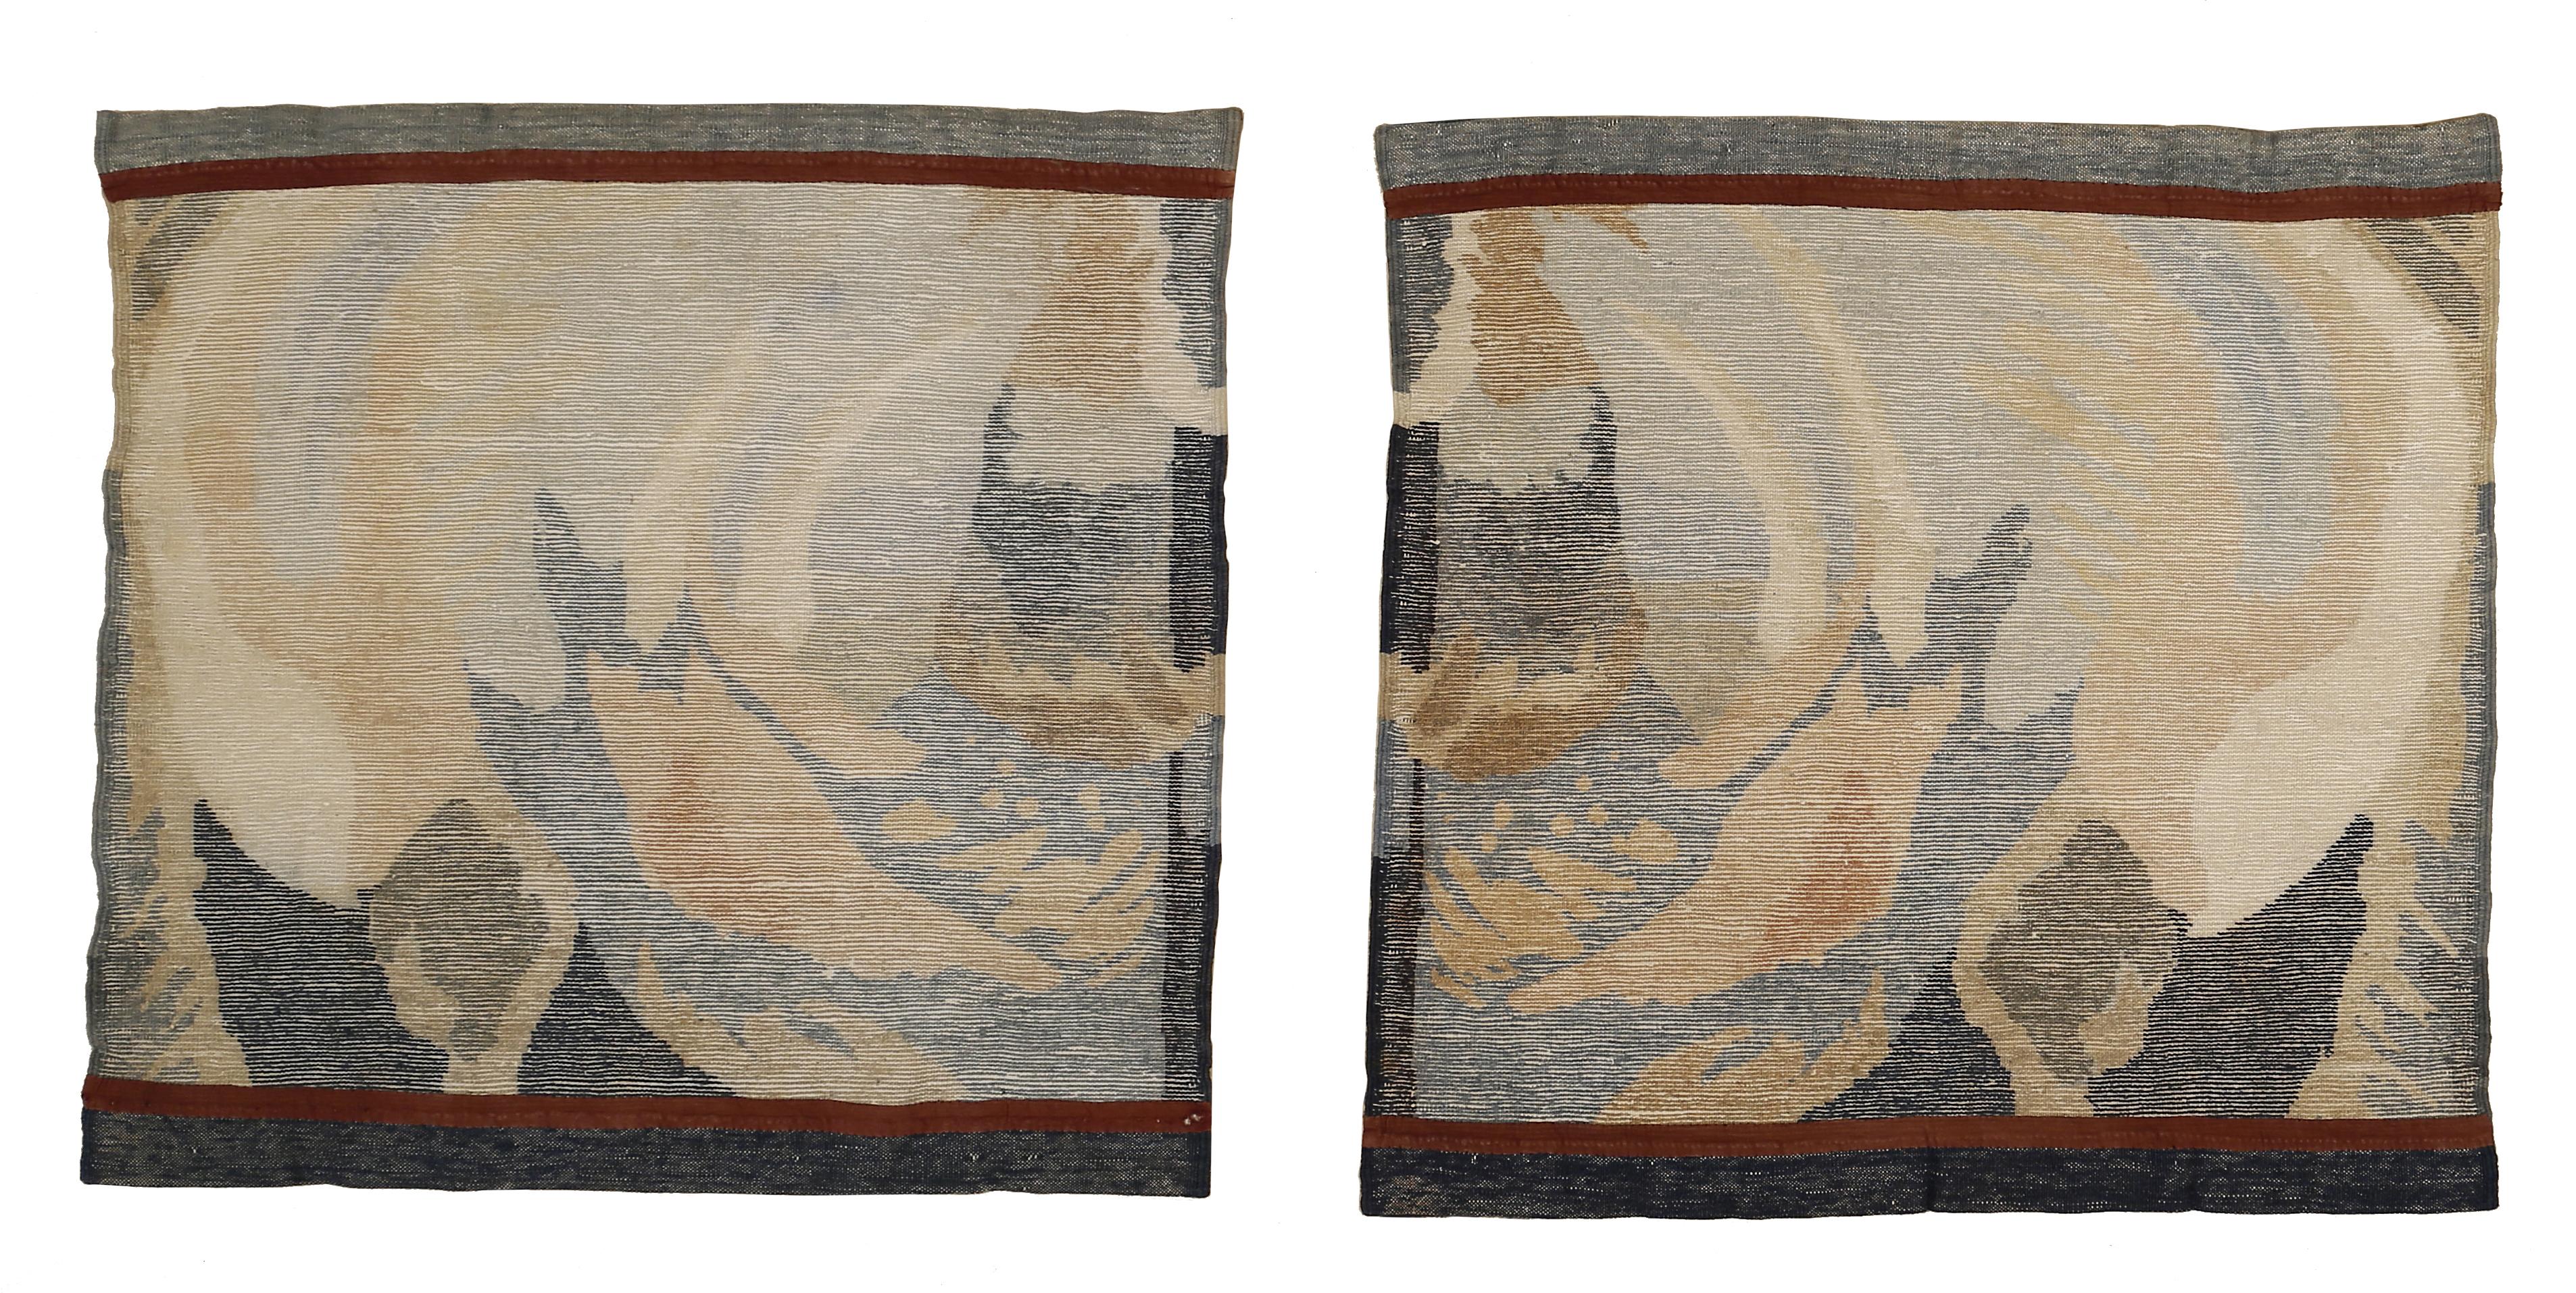 An extremely rare Art Deco rug designed in 1925 by Jean Burkhalter and commissioned by Pierre Chareau for a seaside mansion on the island of Corsica. This pair, which is in mint condition, is part of a suite of five pieces, each crafted fit into